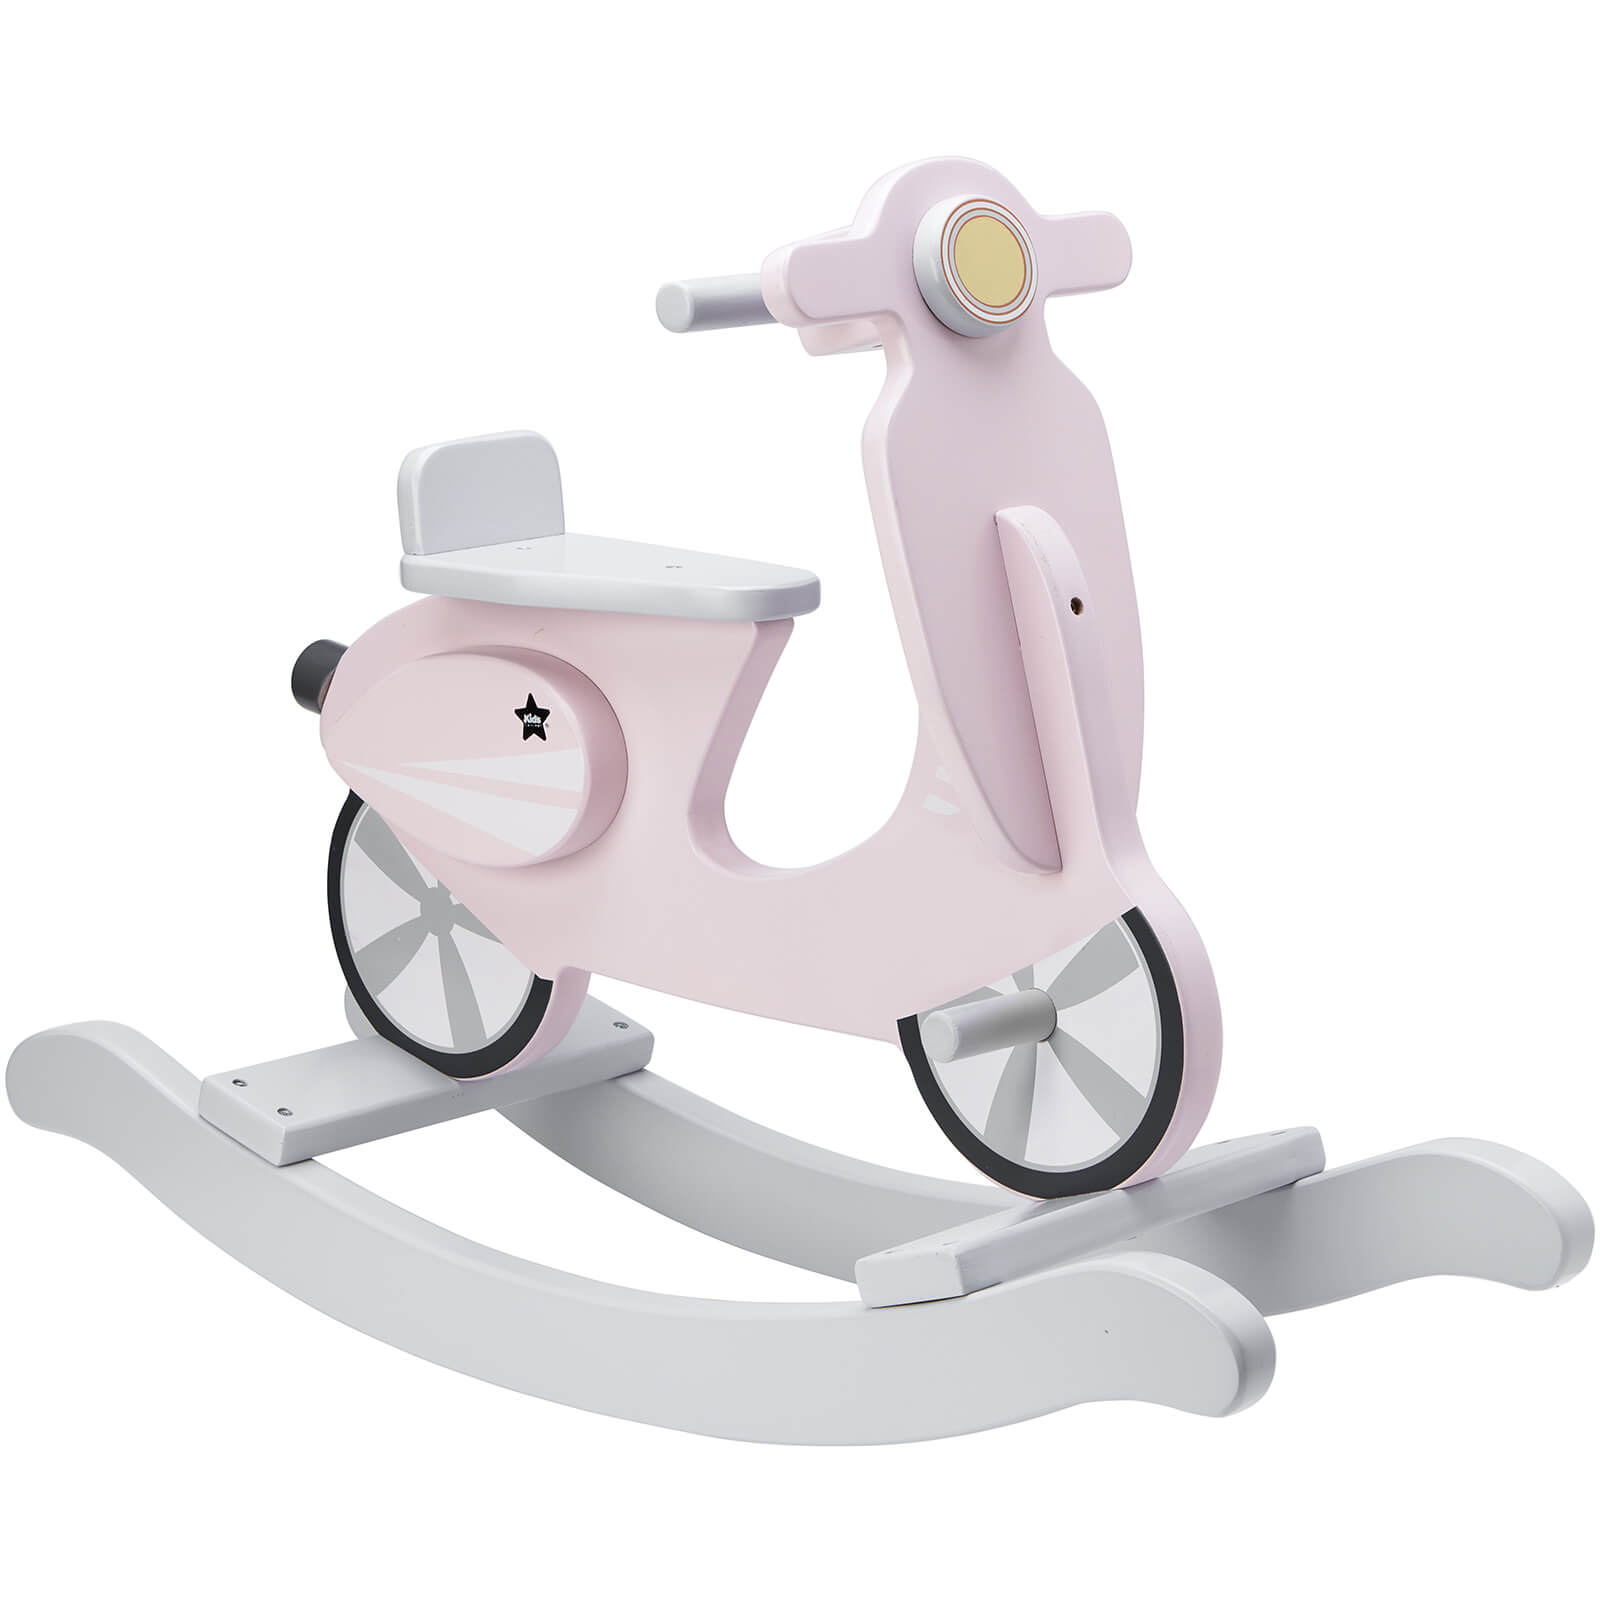 Photos - Role Playing Toy Kids Concept Rocking Scooter - Pink/White 1000159 